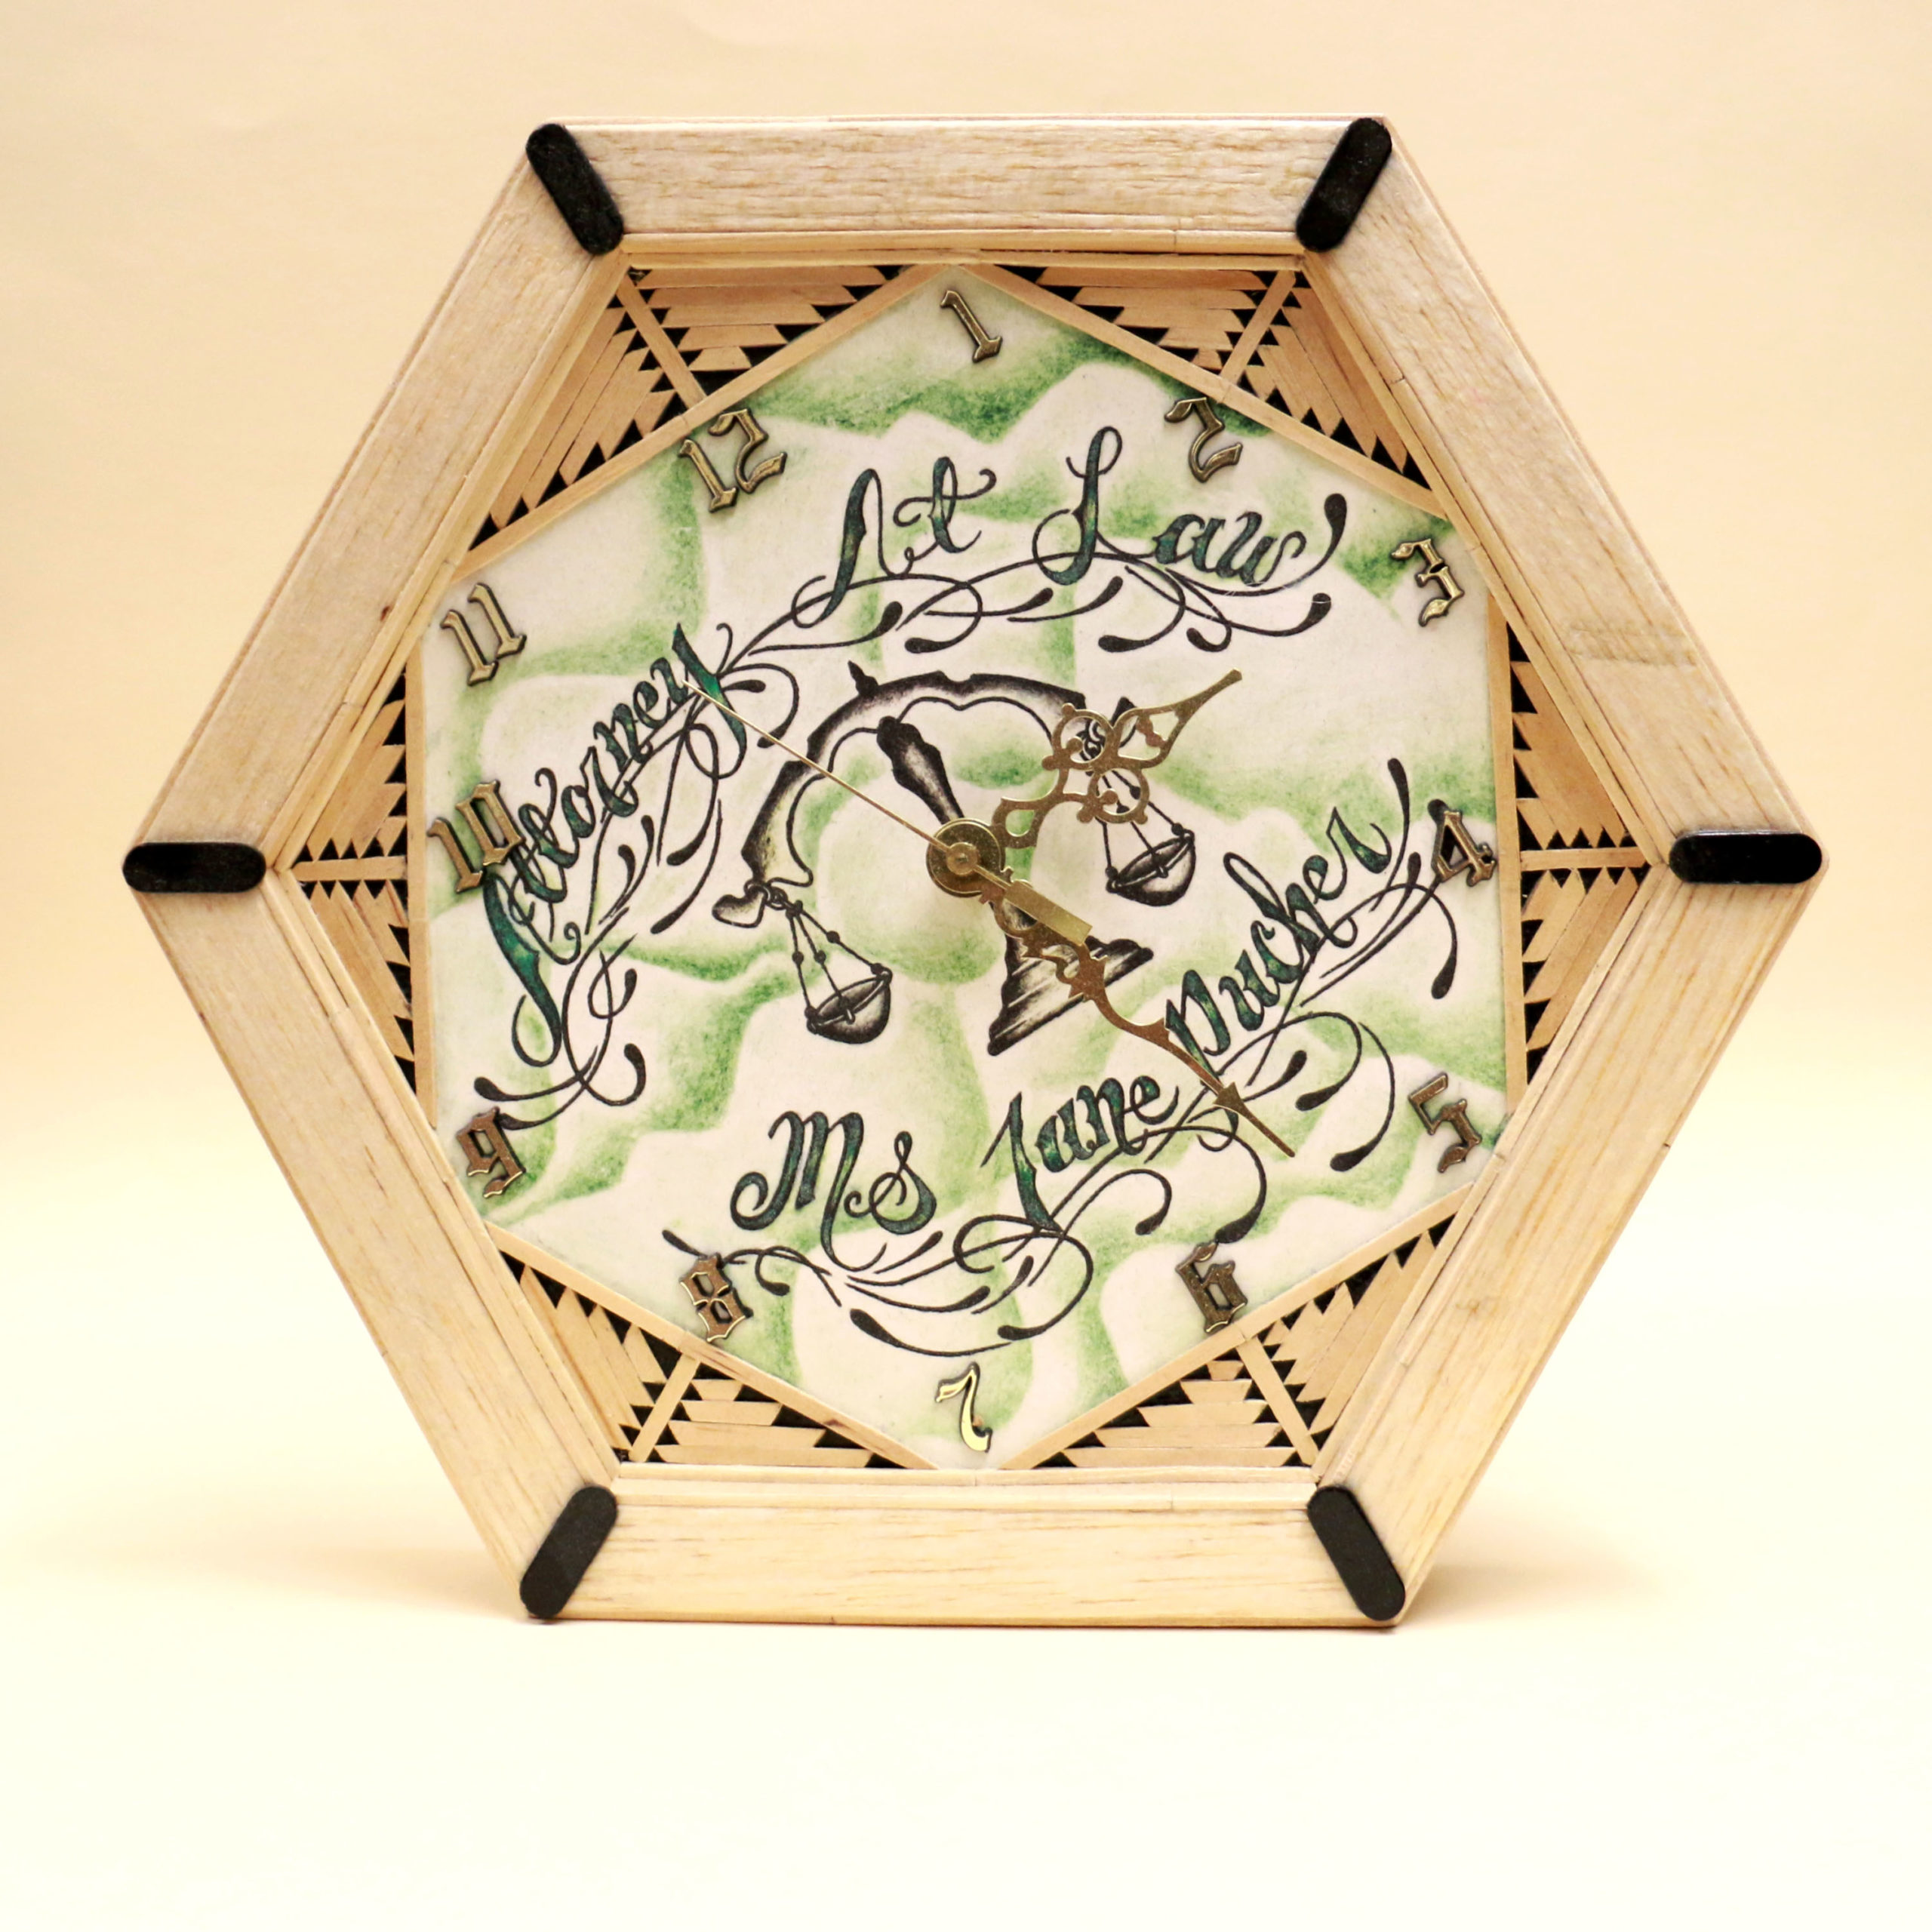 A clock Gerry Thomas made for his Innocence Project attorney Jane Pucher during his wrongful incarceration. (Image: Innocence Project)